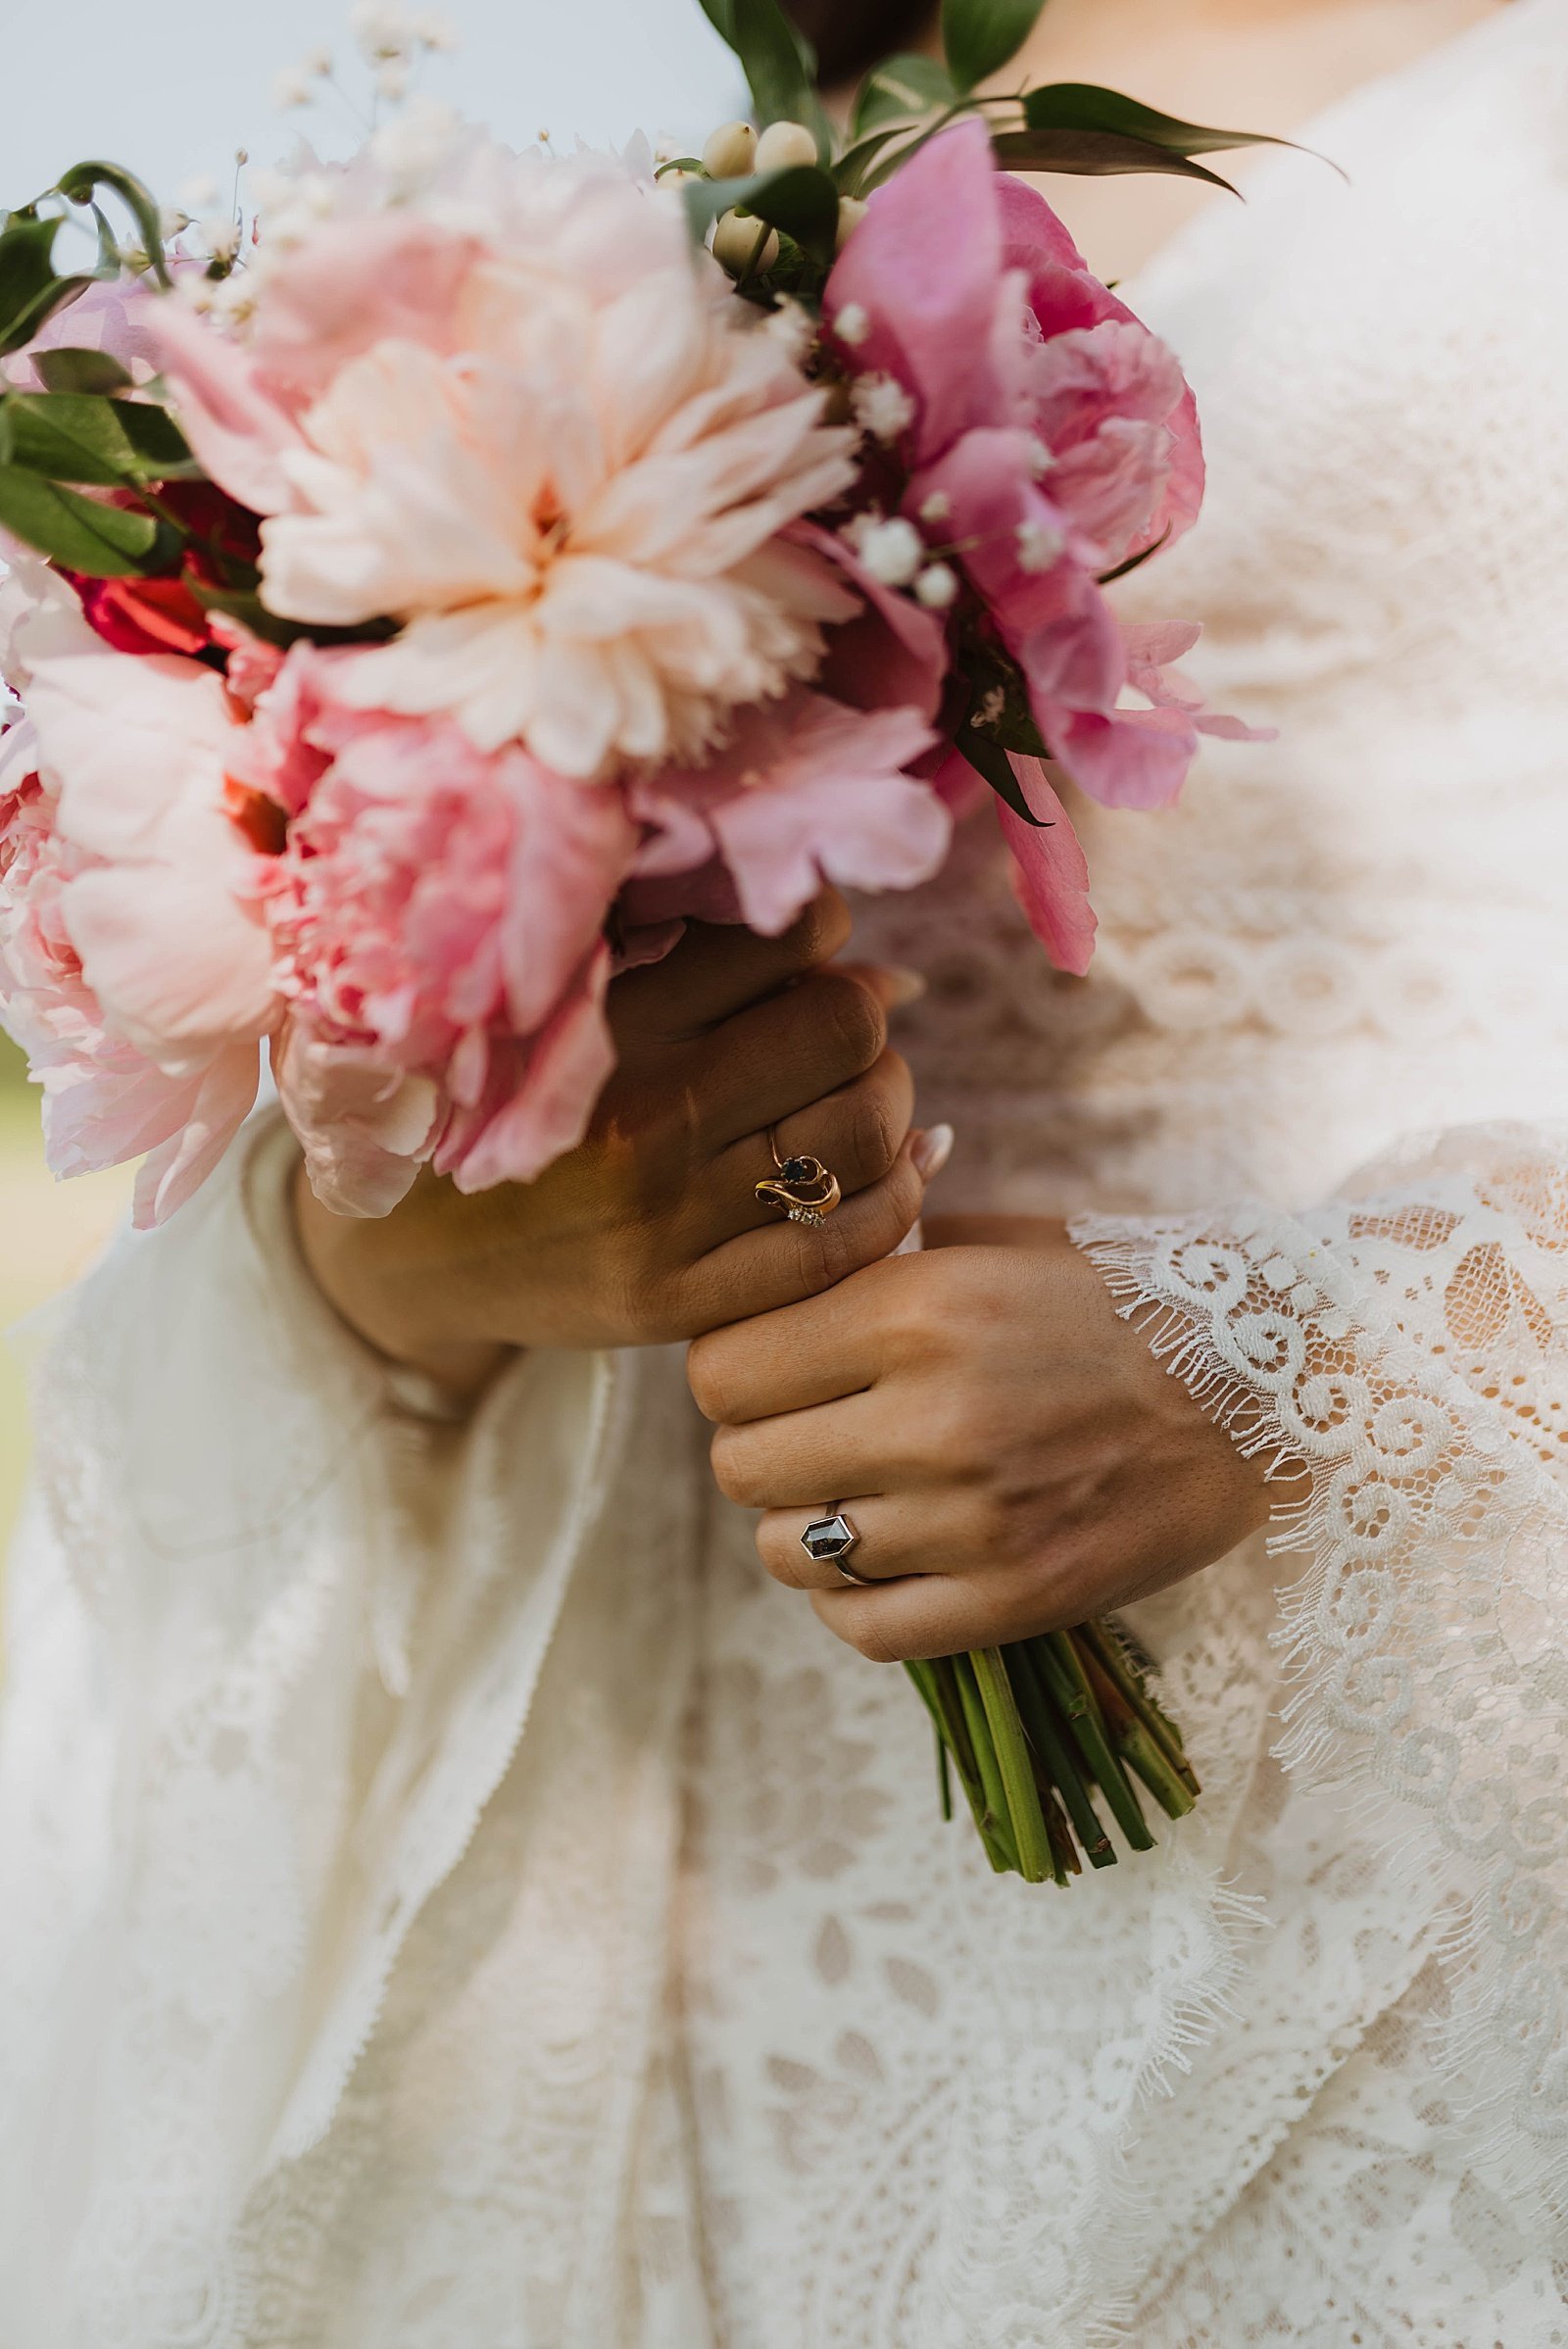  Bride holding flowers with her new wedding band on her finger by Alaska wedding photographer, Theresa McDonald.  